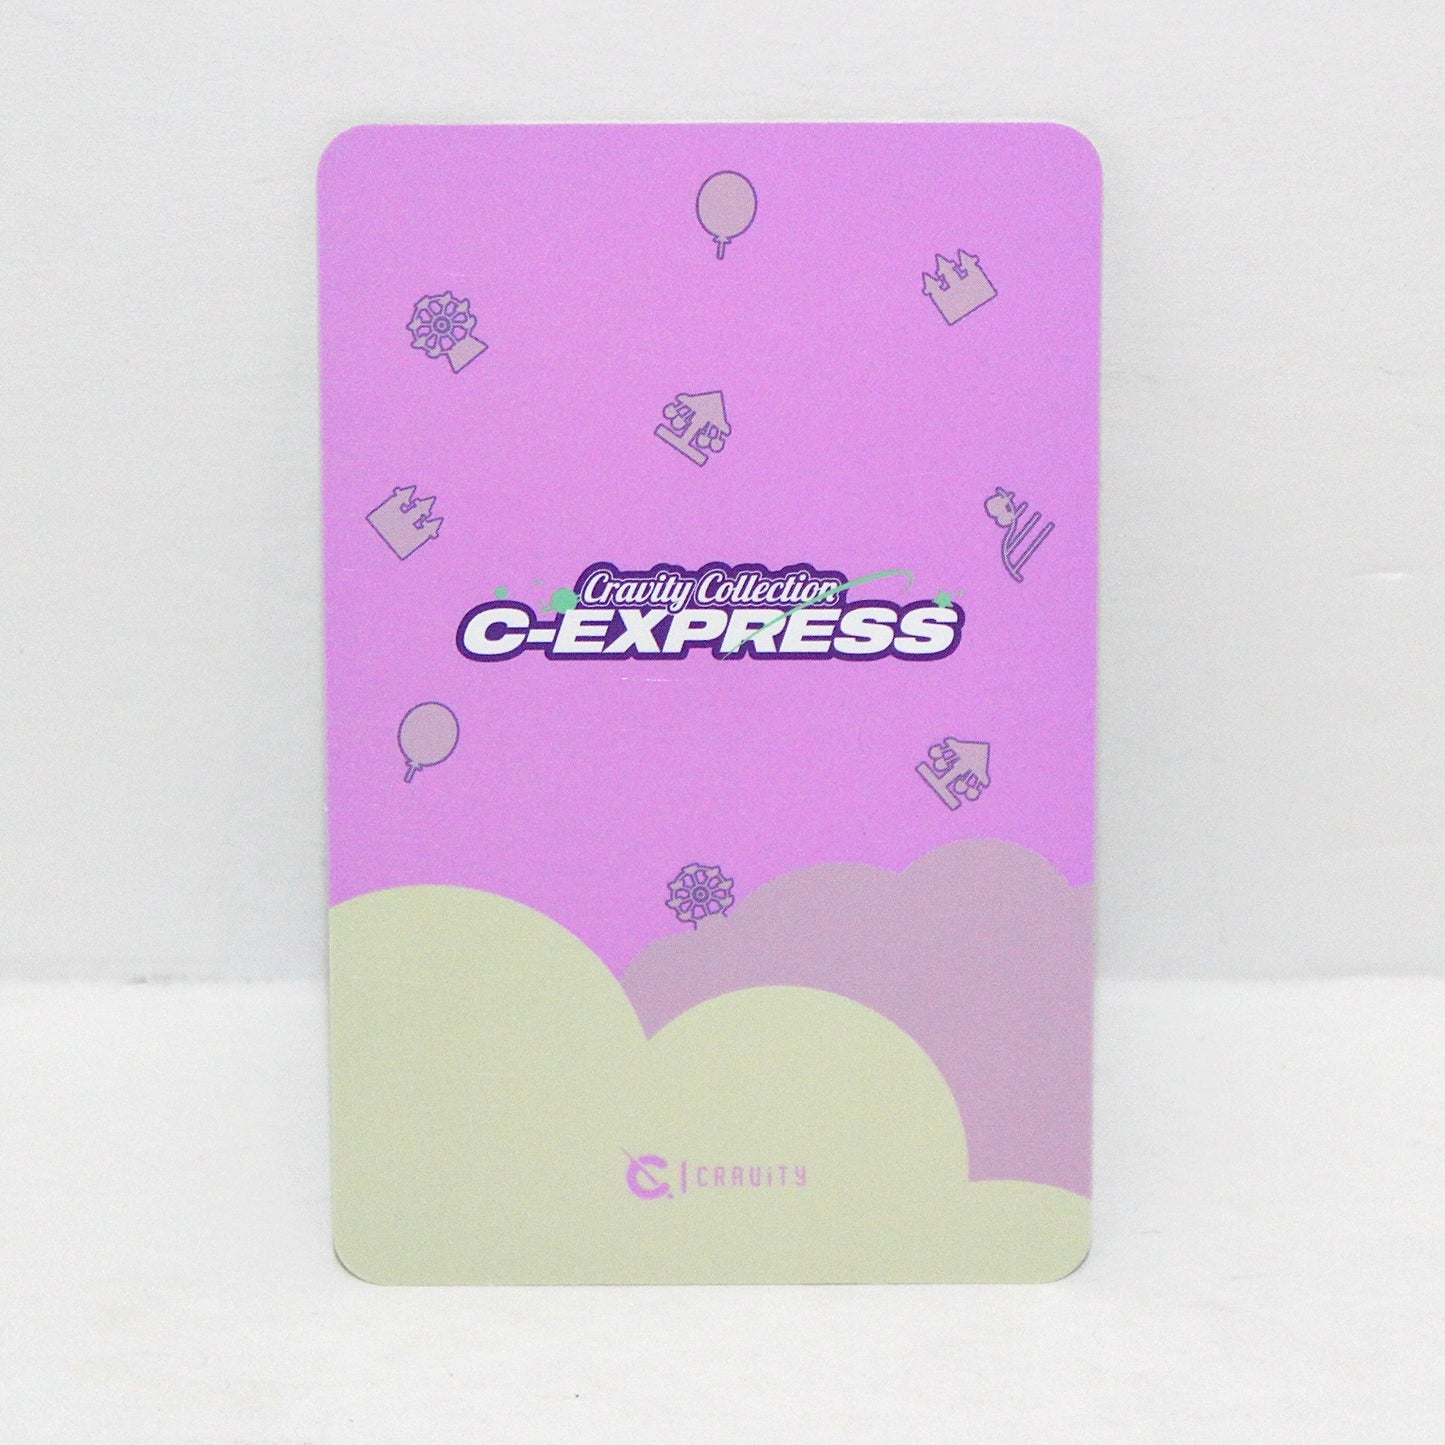 CRAVITY 1st Fanmeeting - Cravity Collection: C-Express | Merch